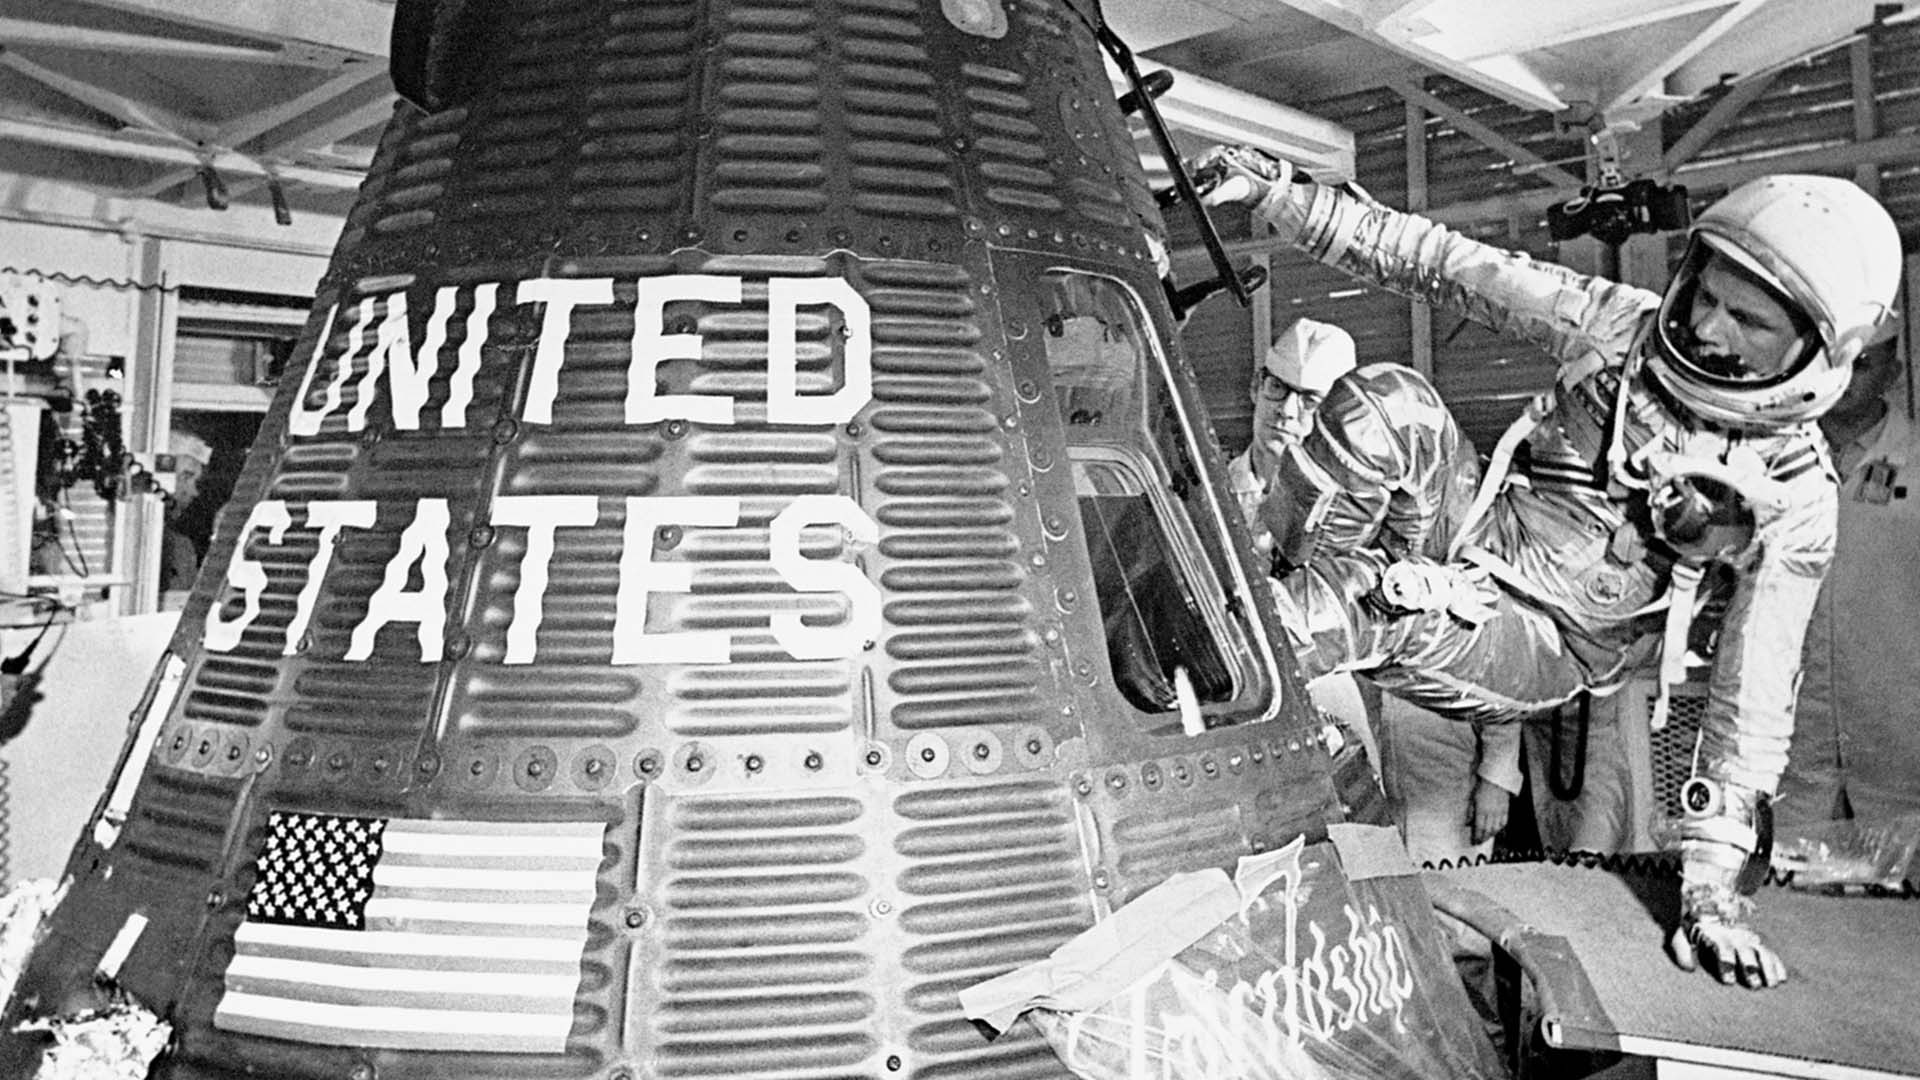 John Glenn boards the Friendship 7 capsule to become the first American to orbit the earth, during the Mercury-Atlas 6) mission, on Feb. 20, 1962